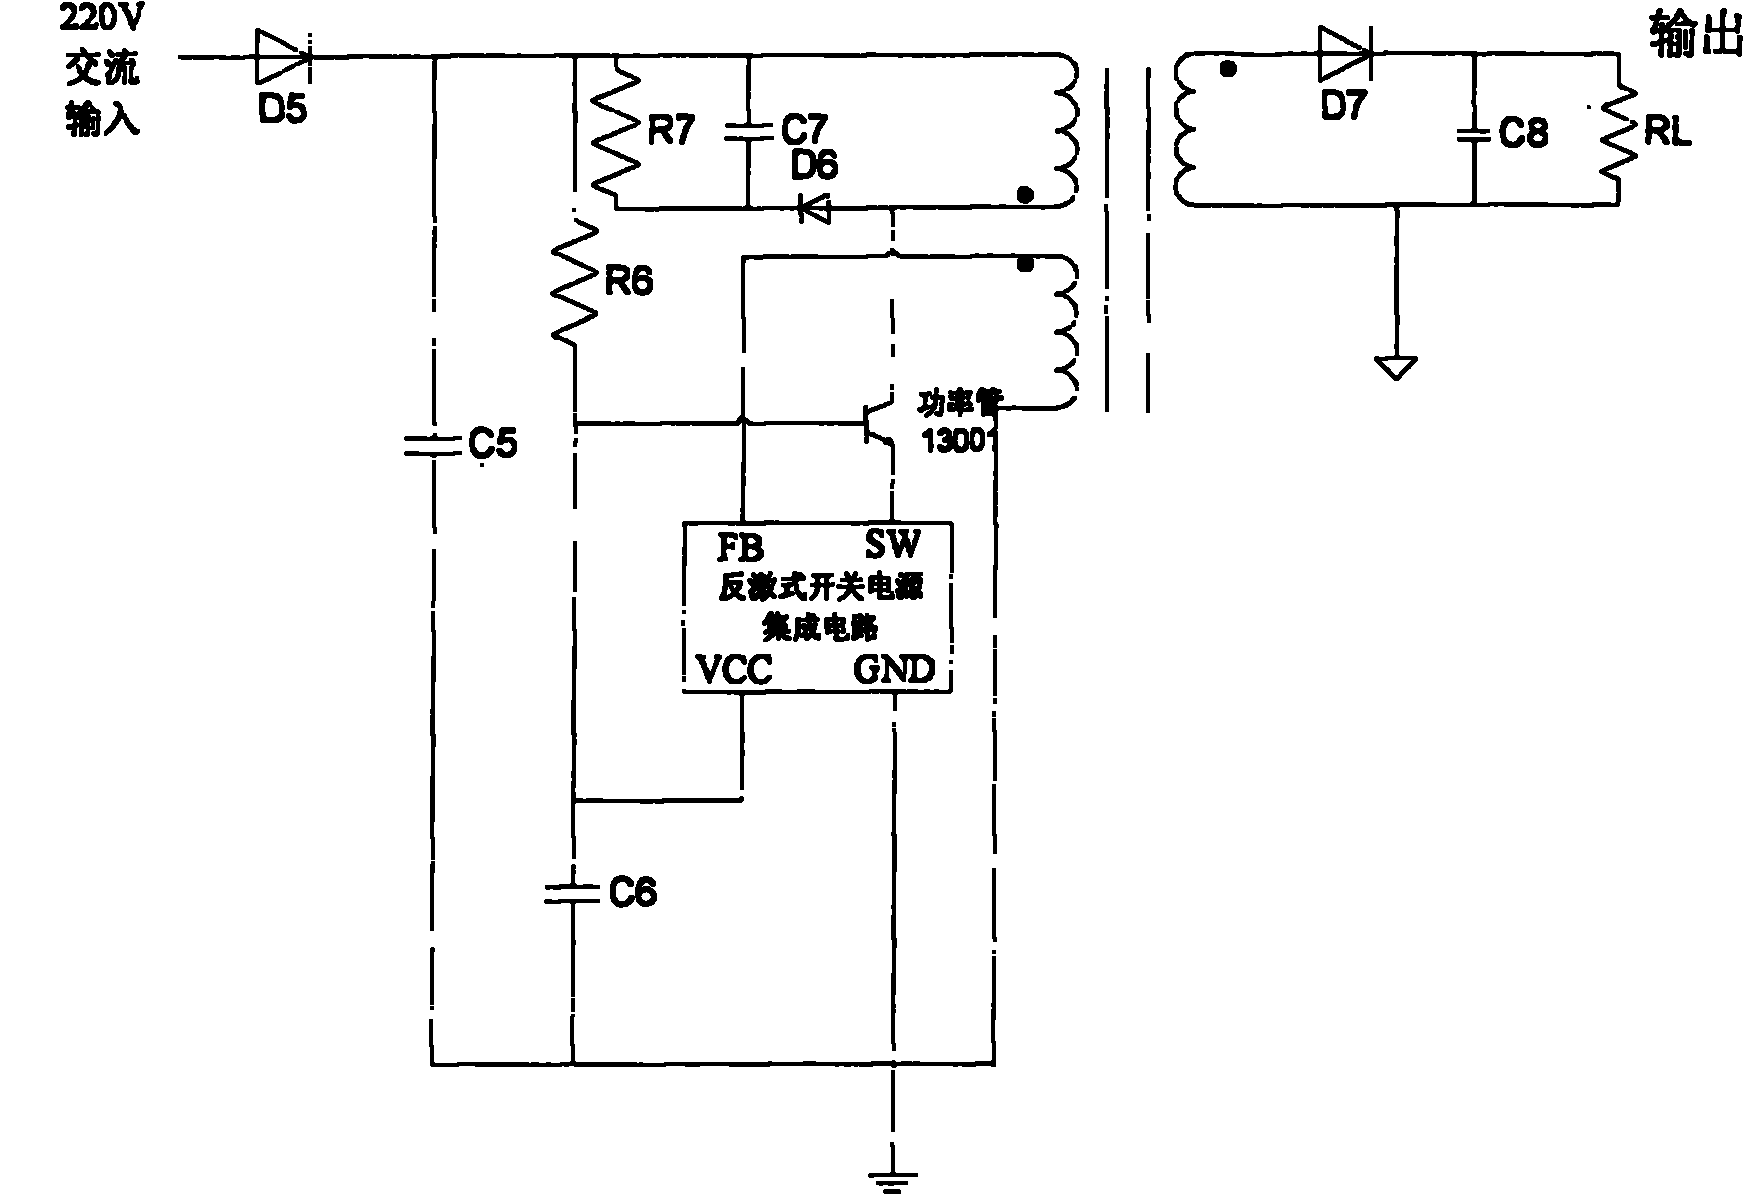 Power supply device of universal charger